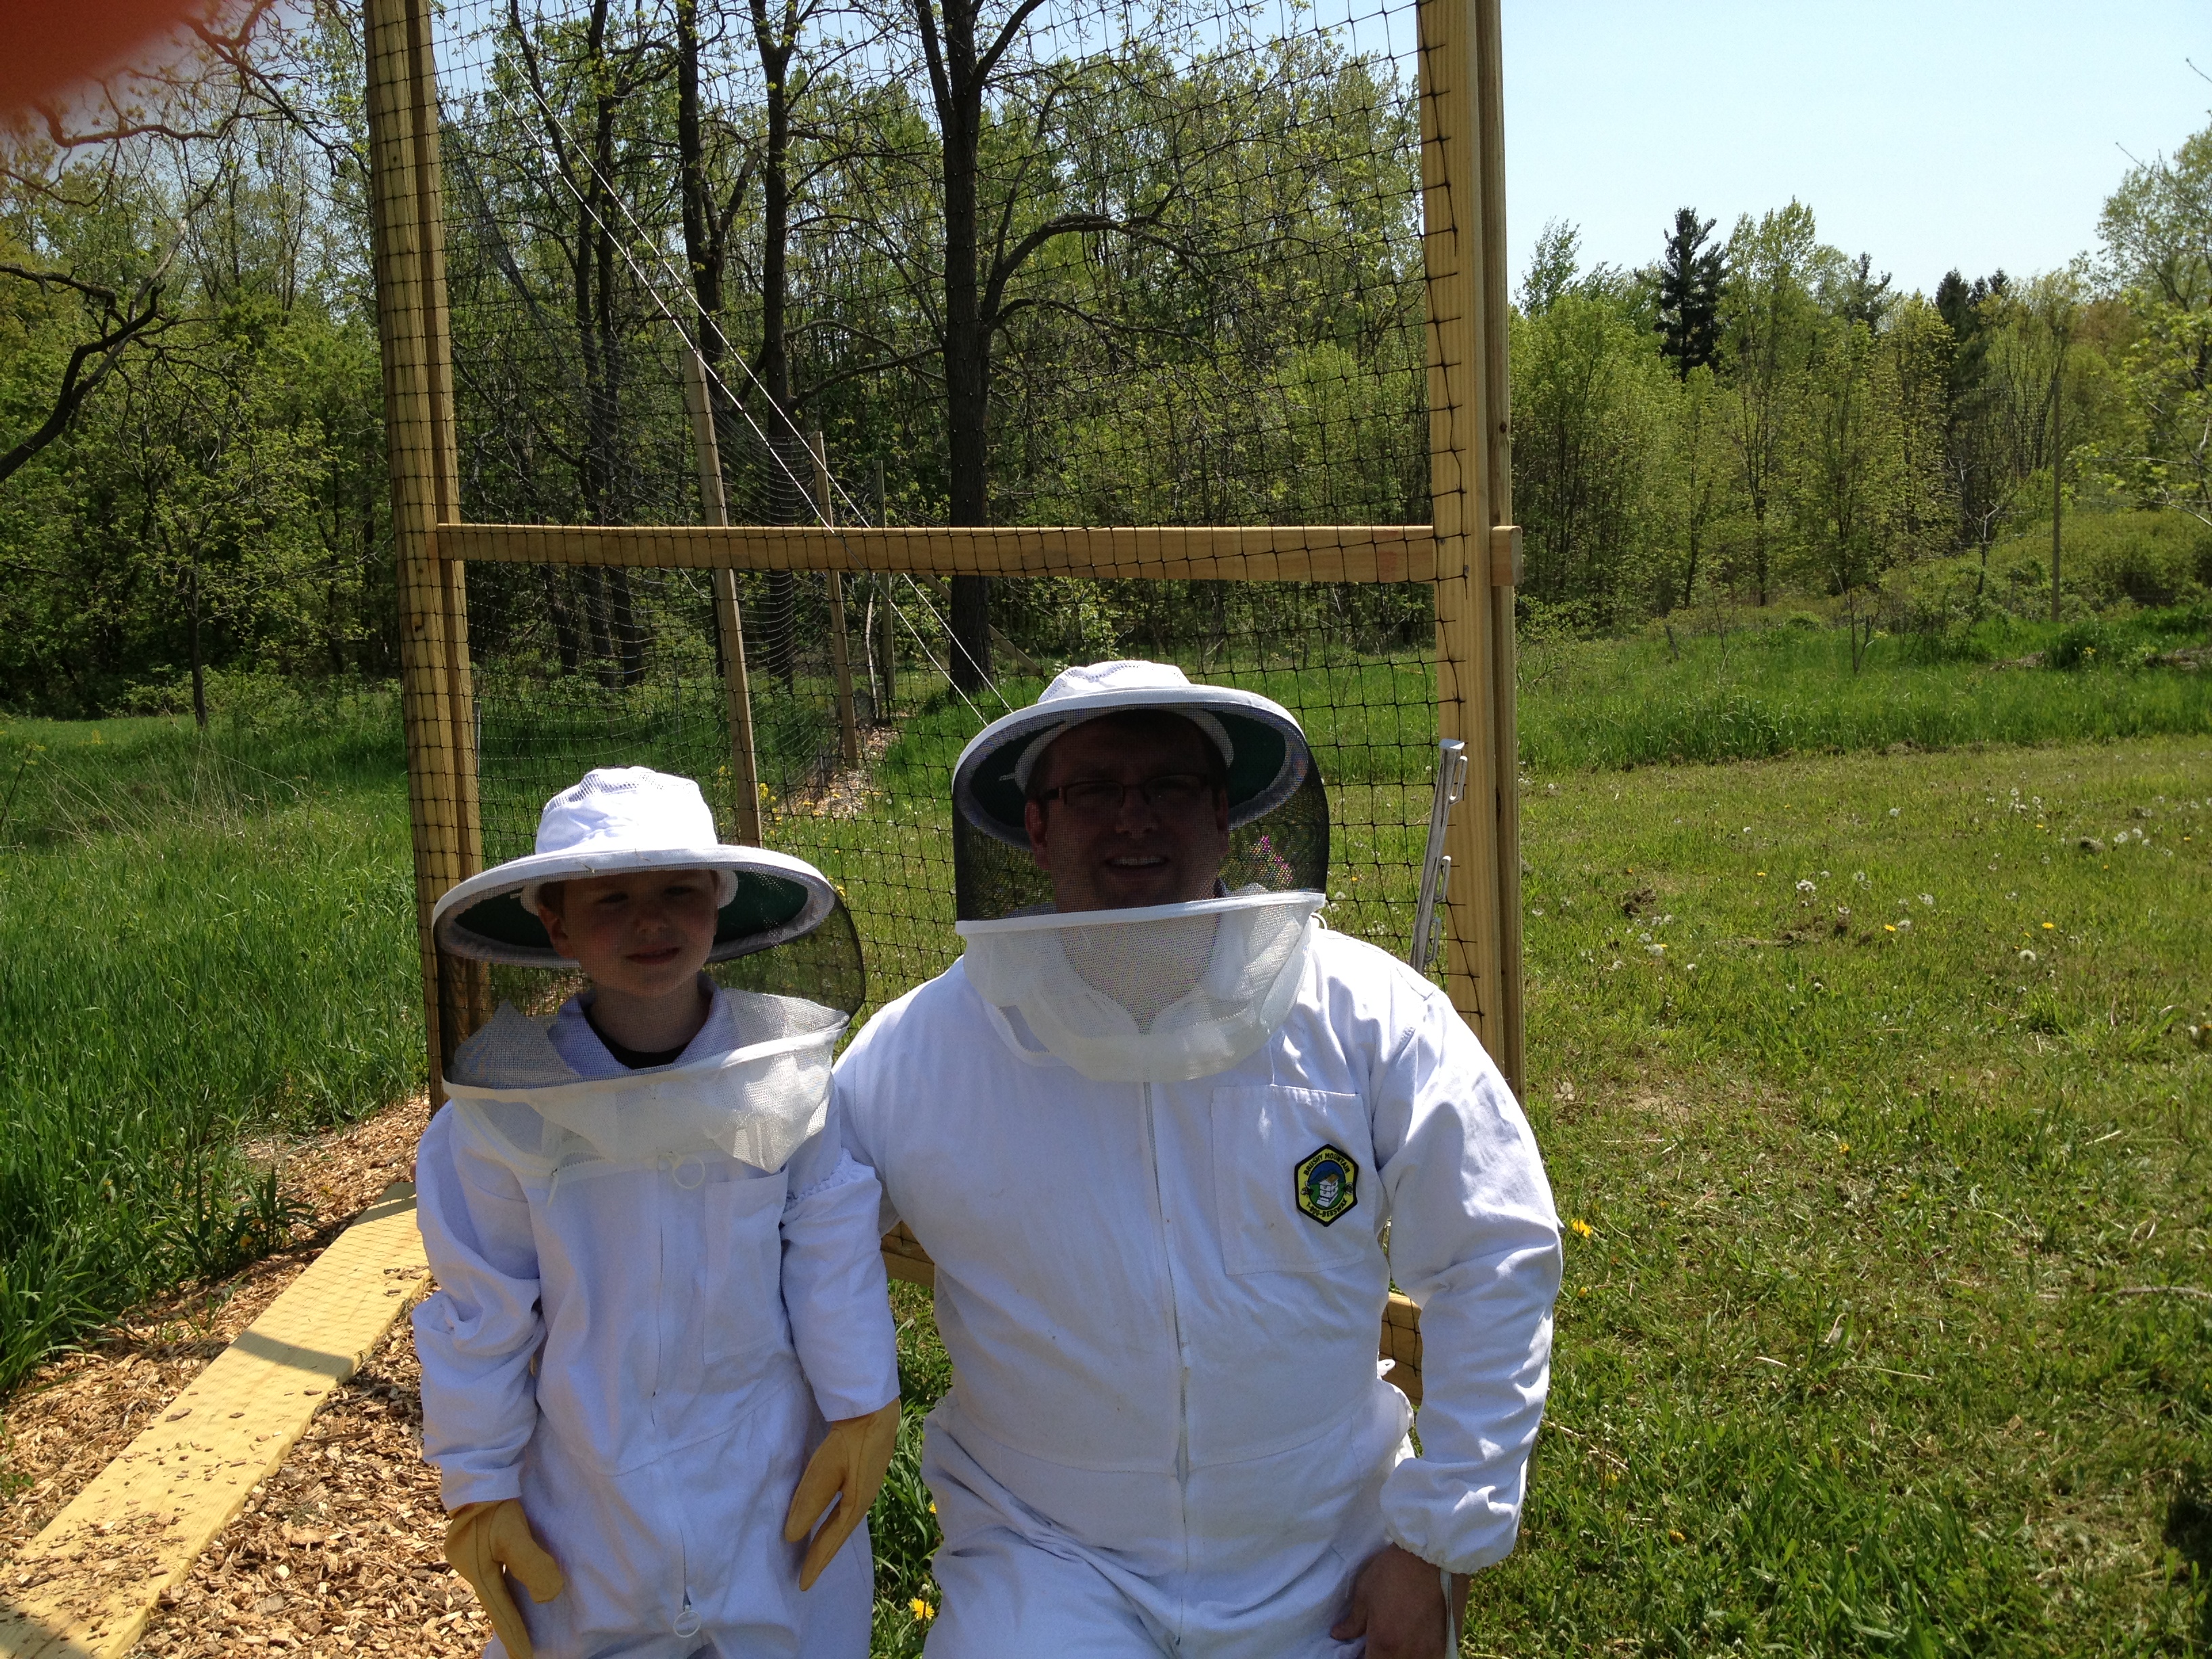 Dad and Son Luke inspecting hives